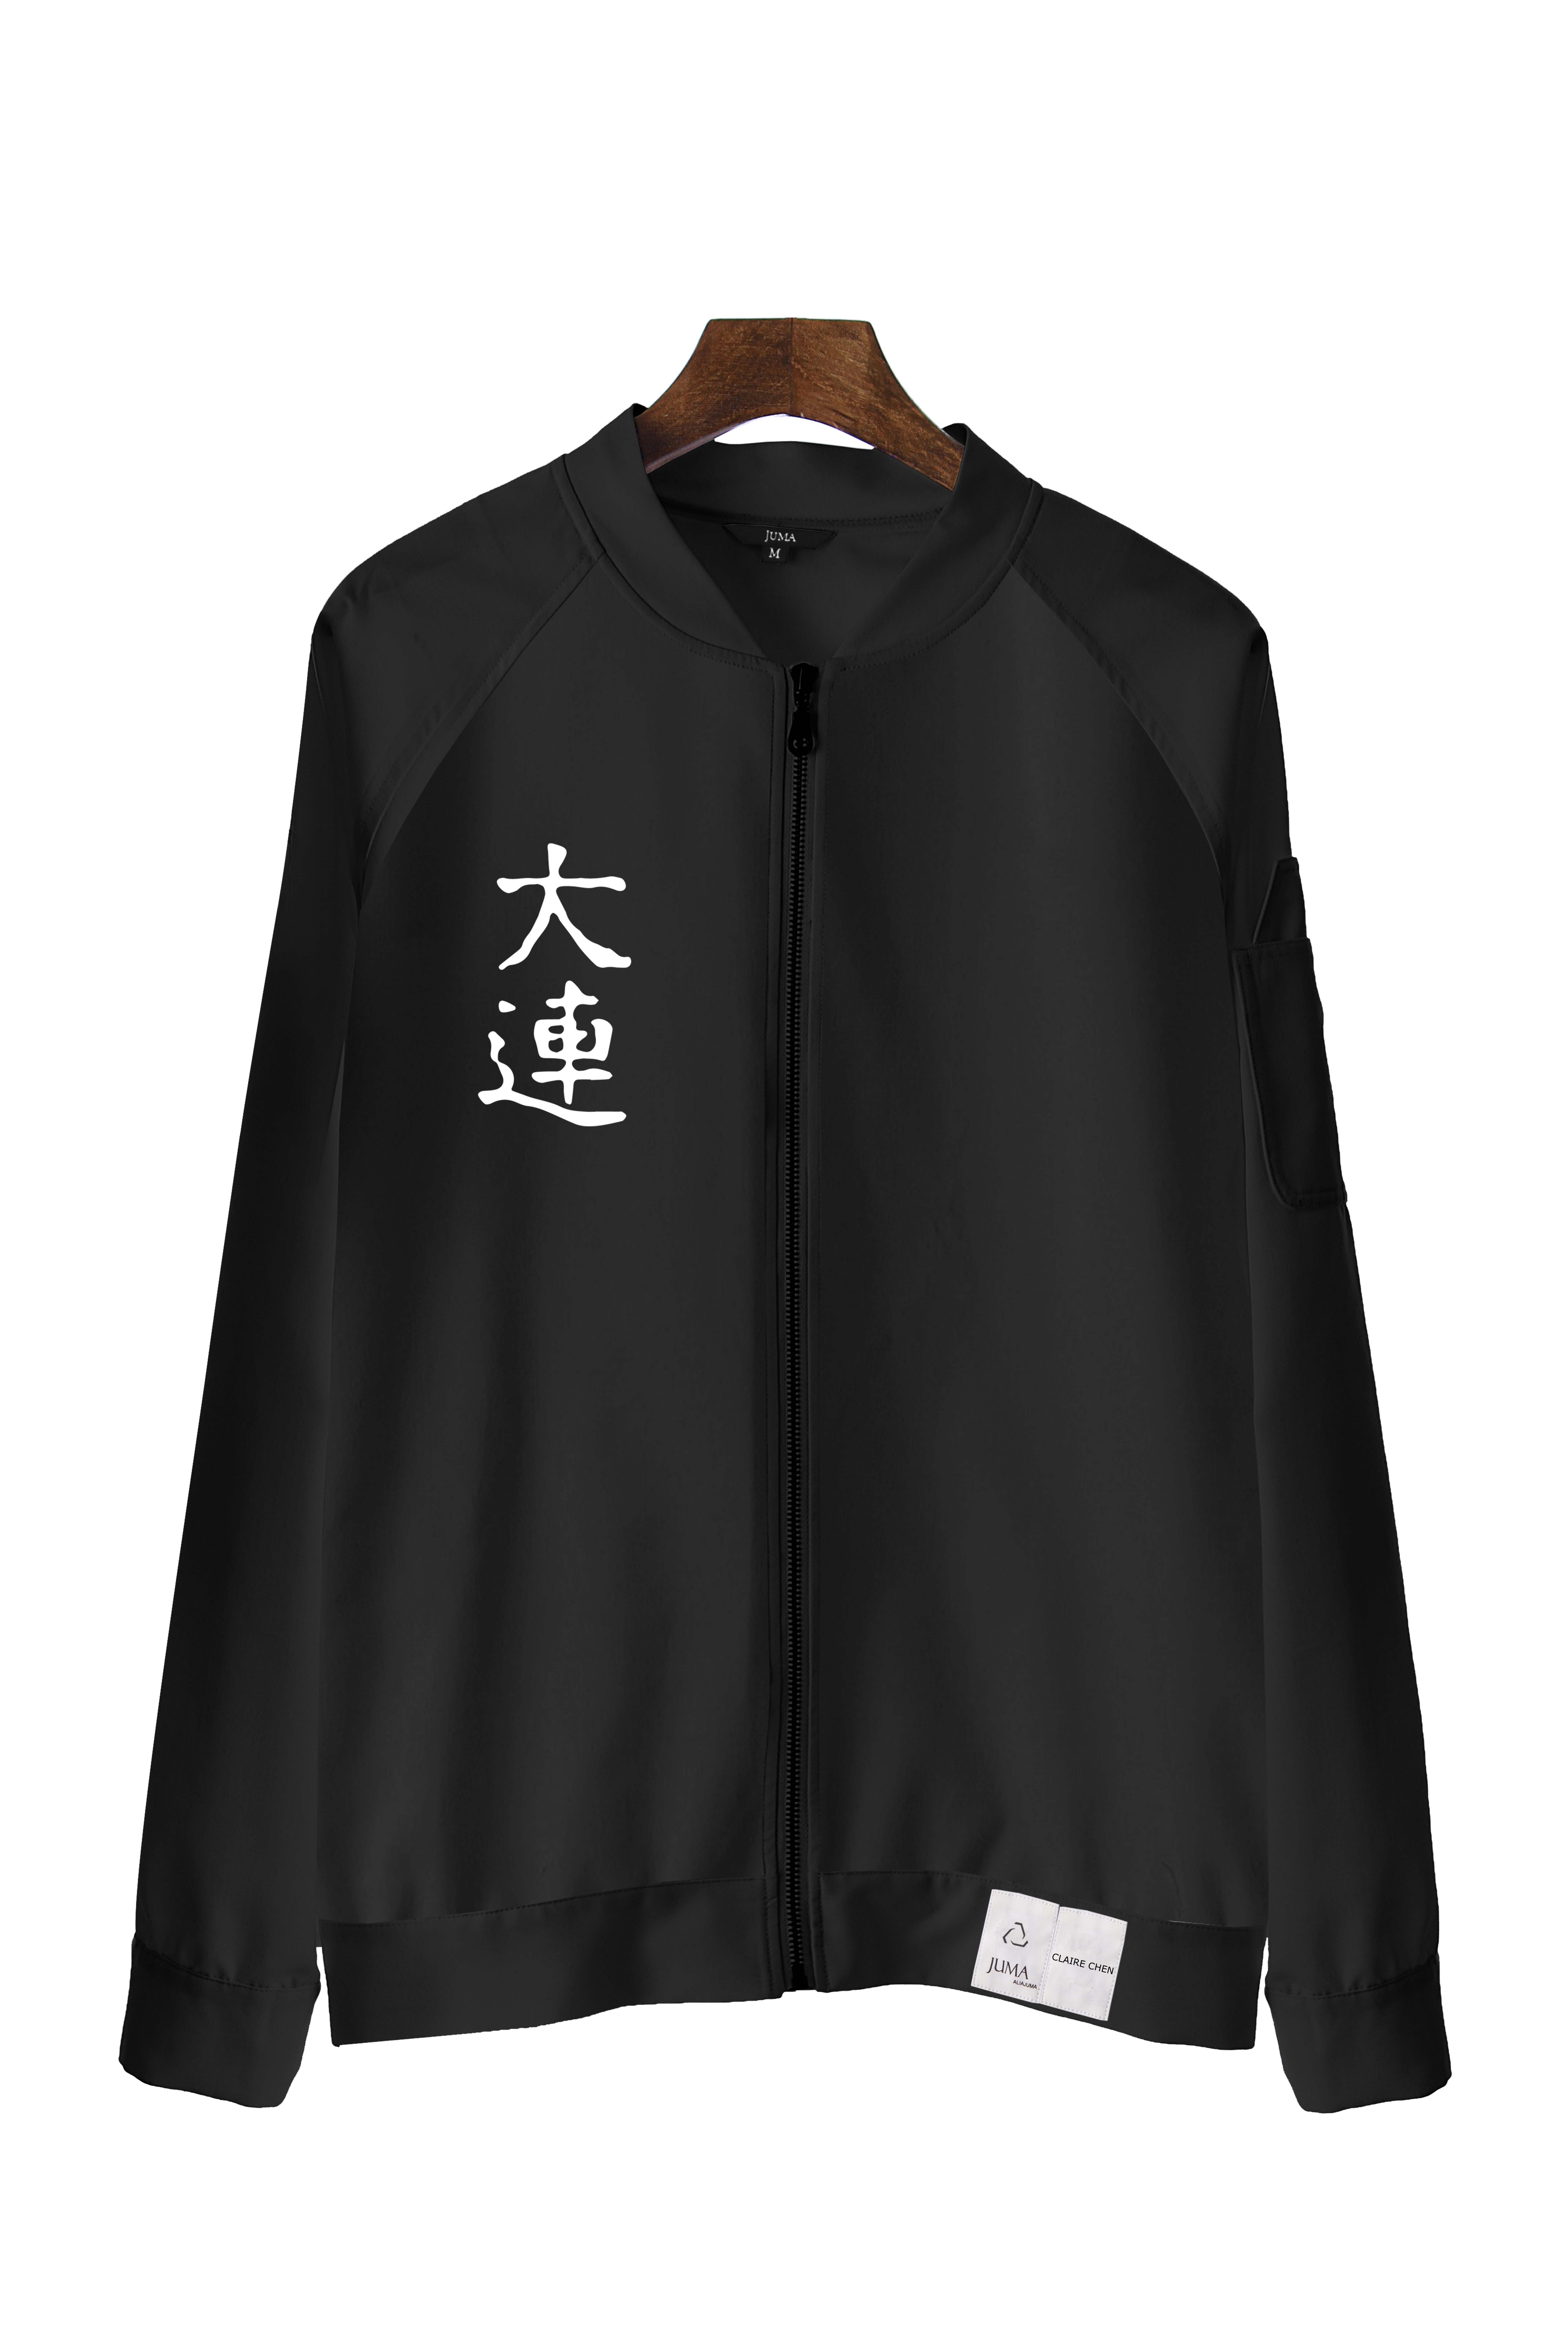 Claire Chen 棒球服夹克-8个回收水瓶-黑色｜Claire Chen Bomber Jacket - 8 Recycled Water Bottles- Black